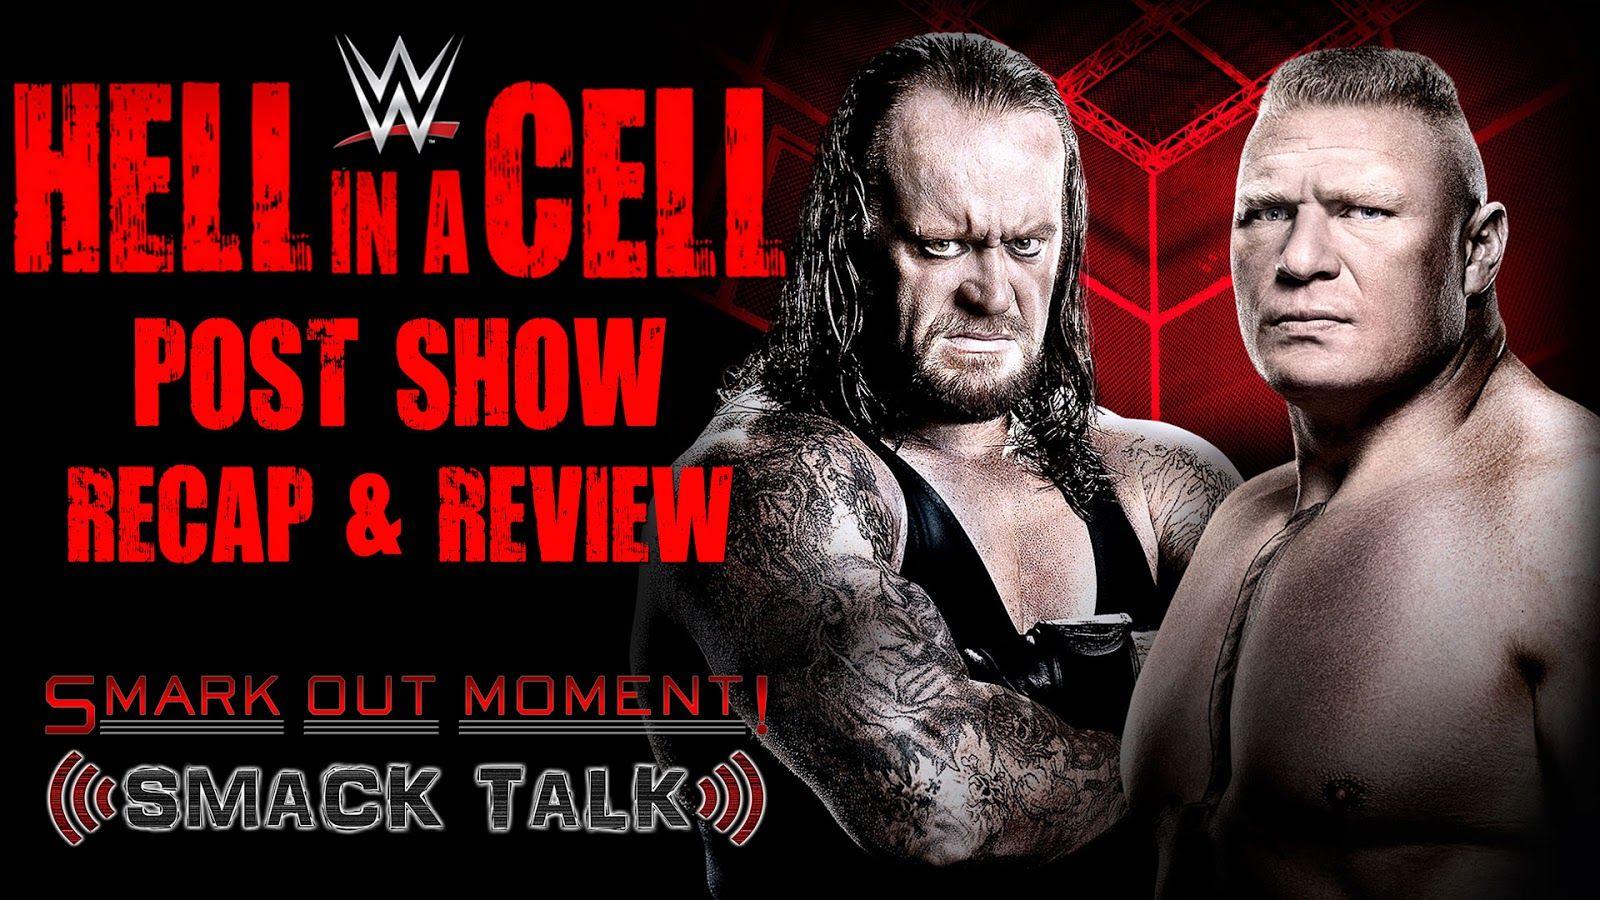 WWE Hell in a Cell 2015 Post Show Recap & Review. Smark Out Moment